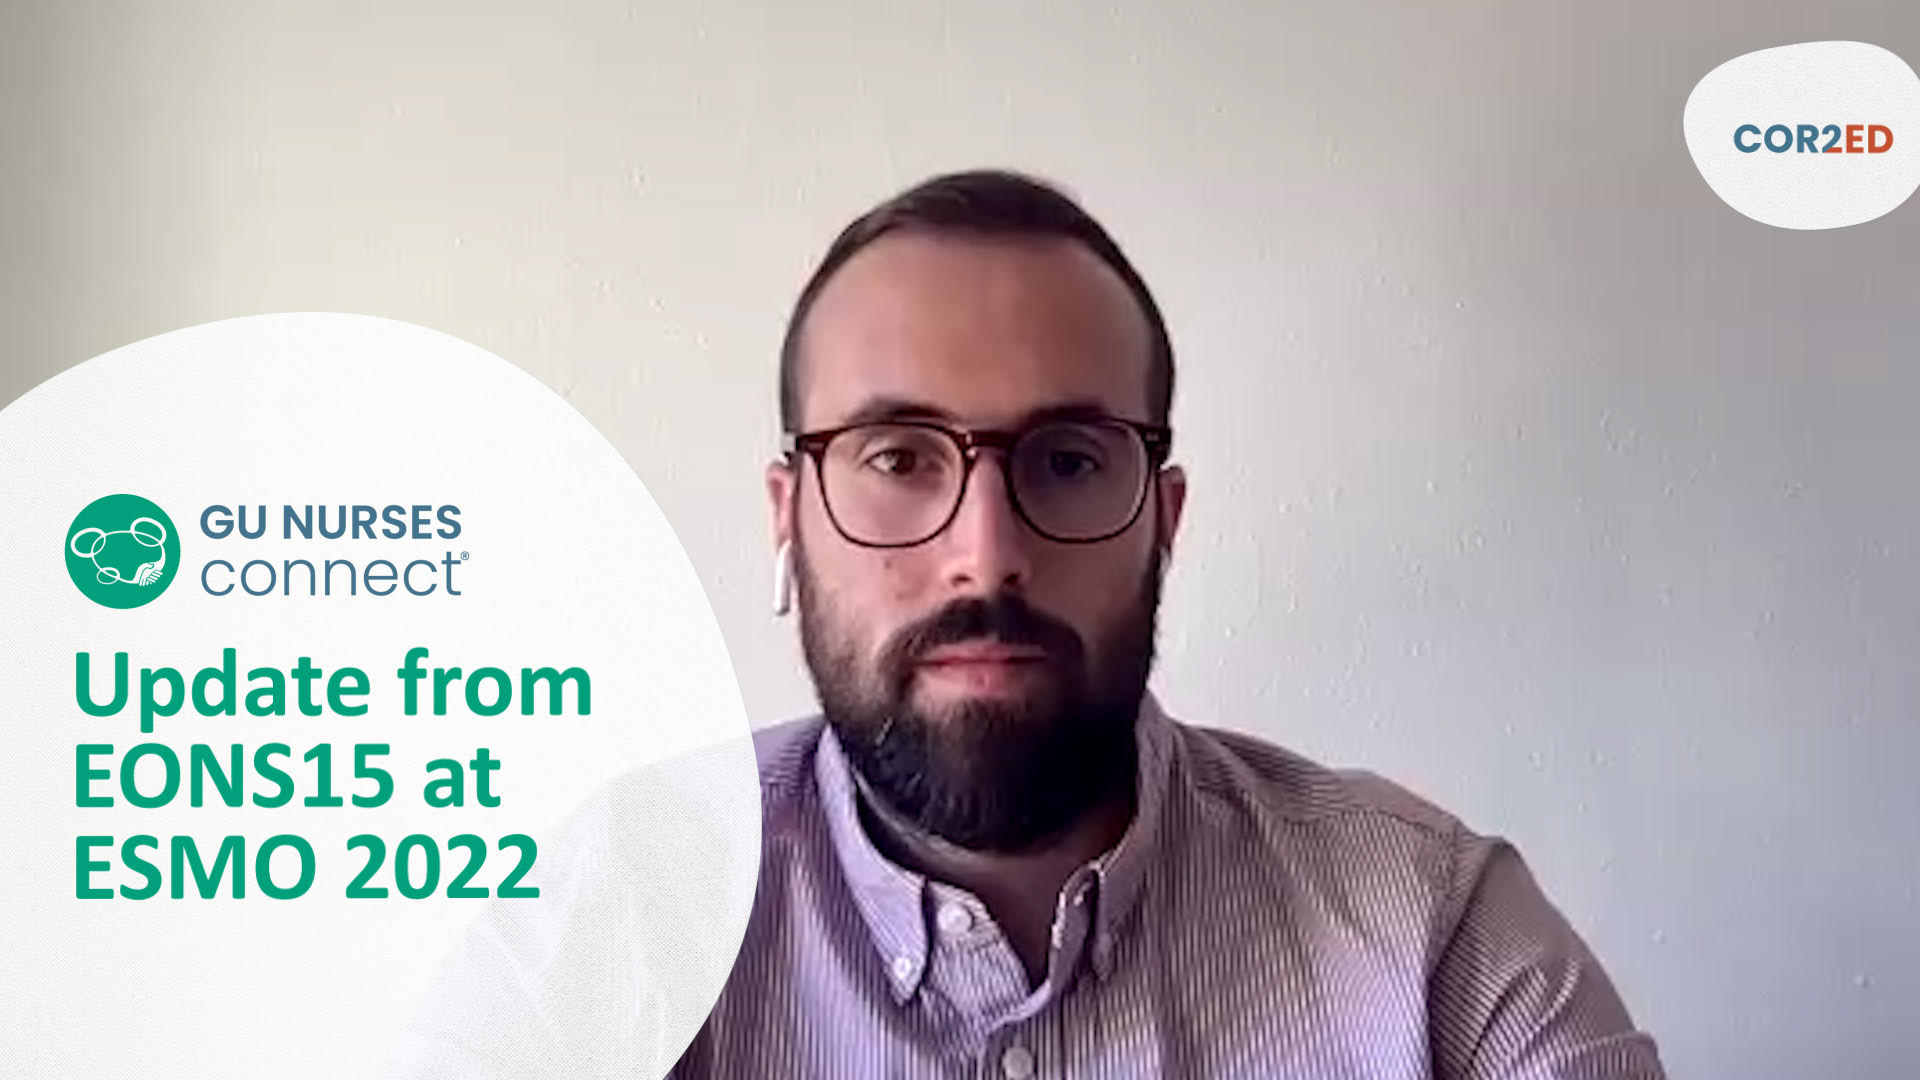 GU NURSES CONNECT Update from EONS15 at ESMO 2022 (English)